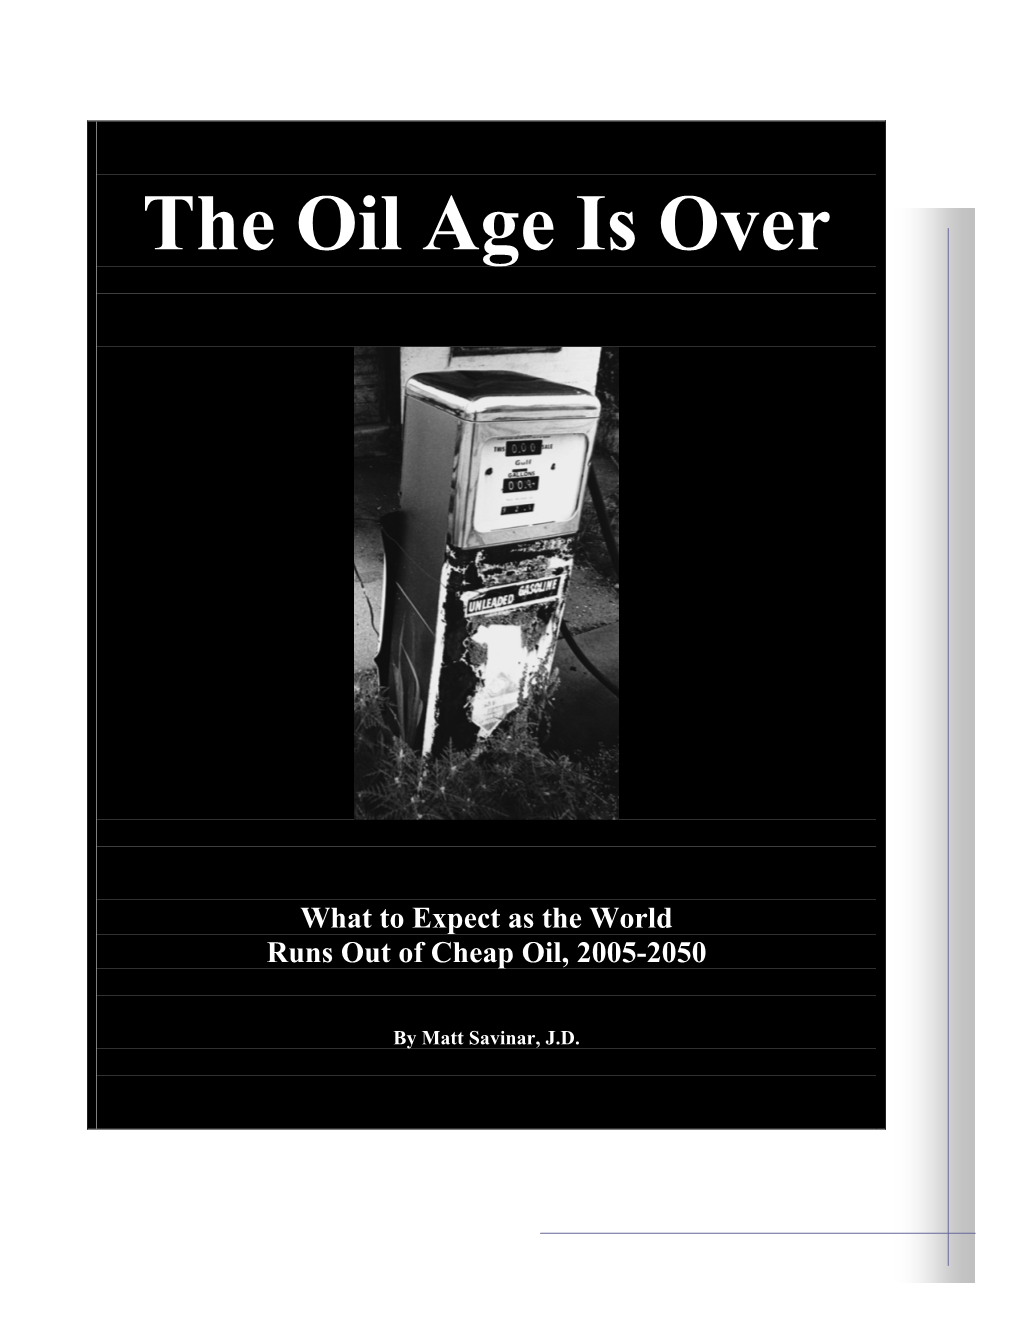 The Oil Age Is Over